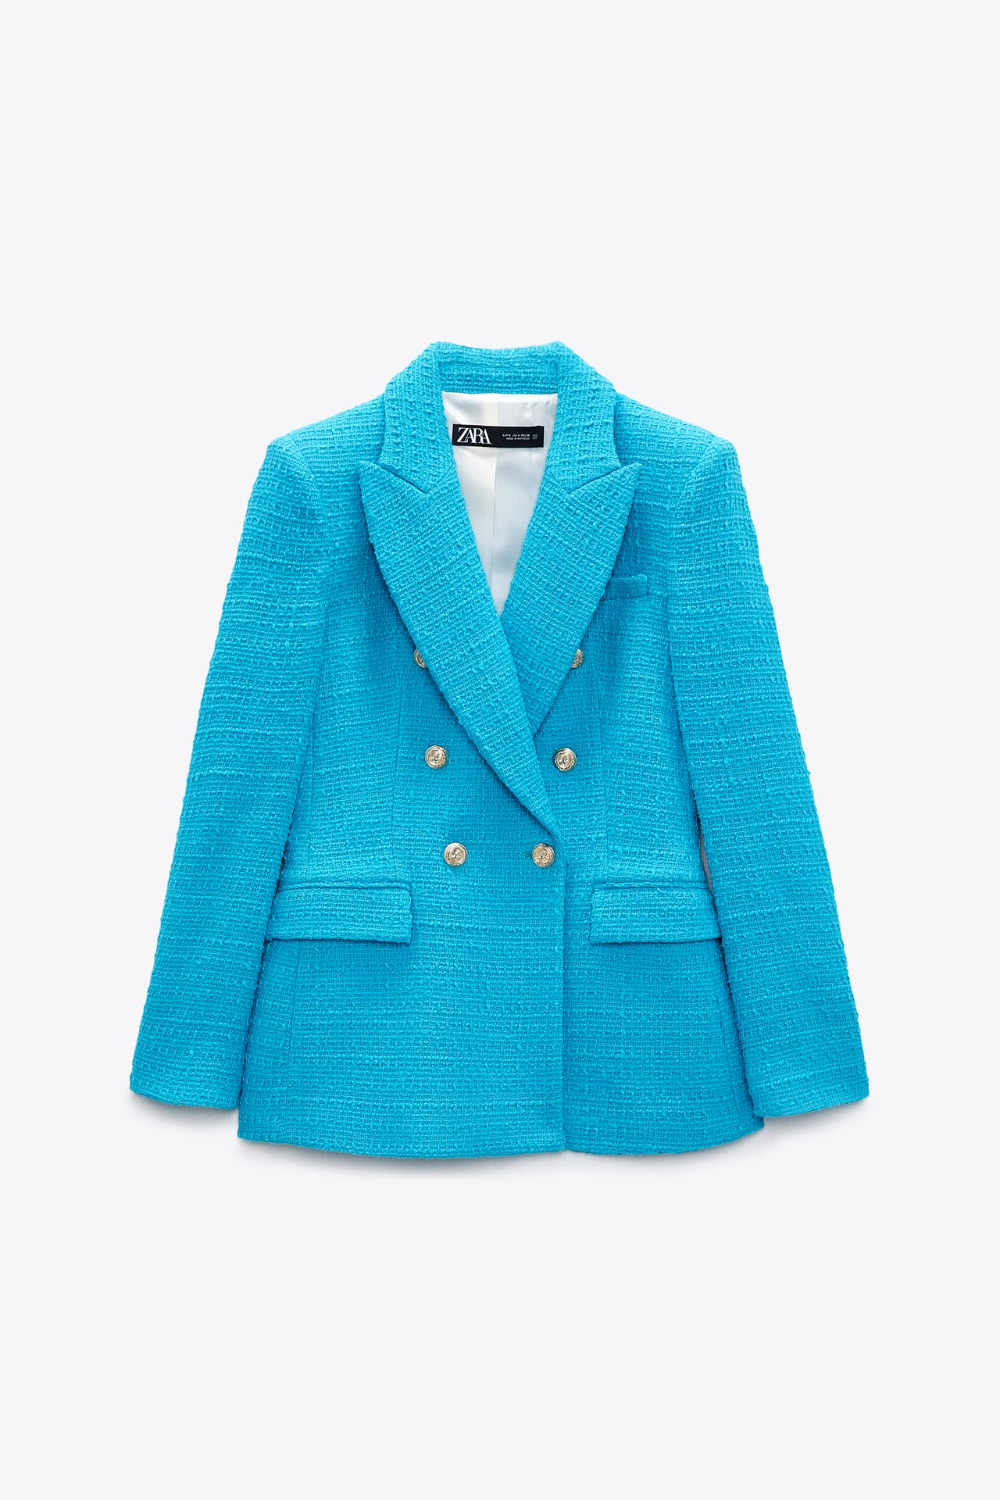 SHEin Dupe for Zara! Guess Which Blazer is $25 - Fly Fierce Fab